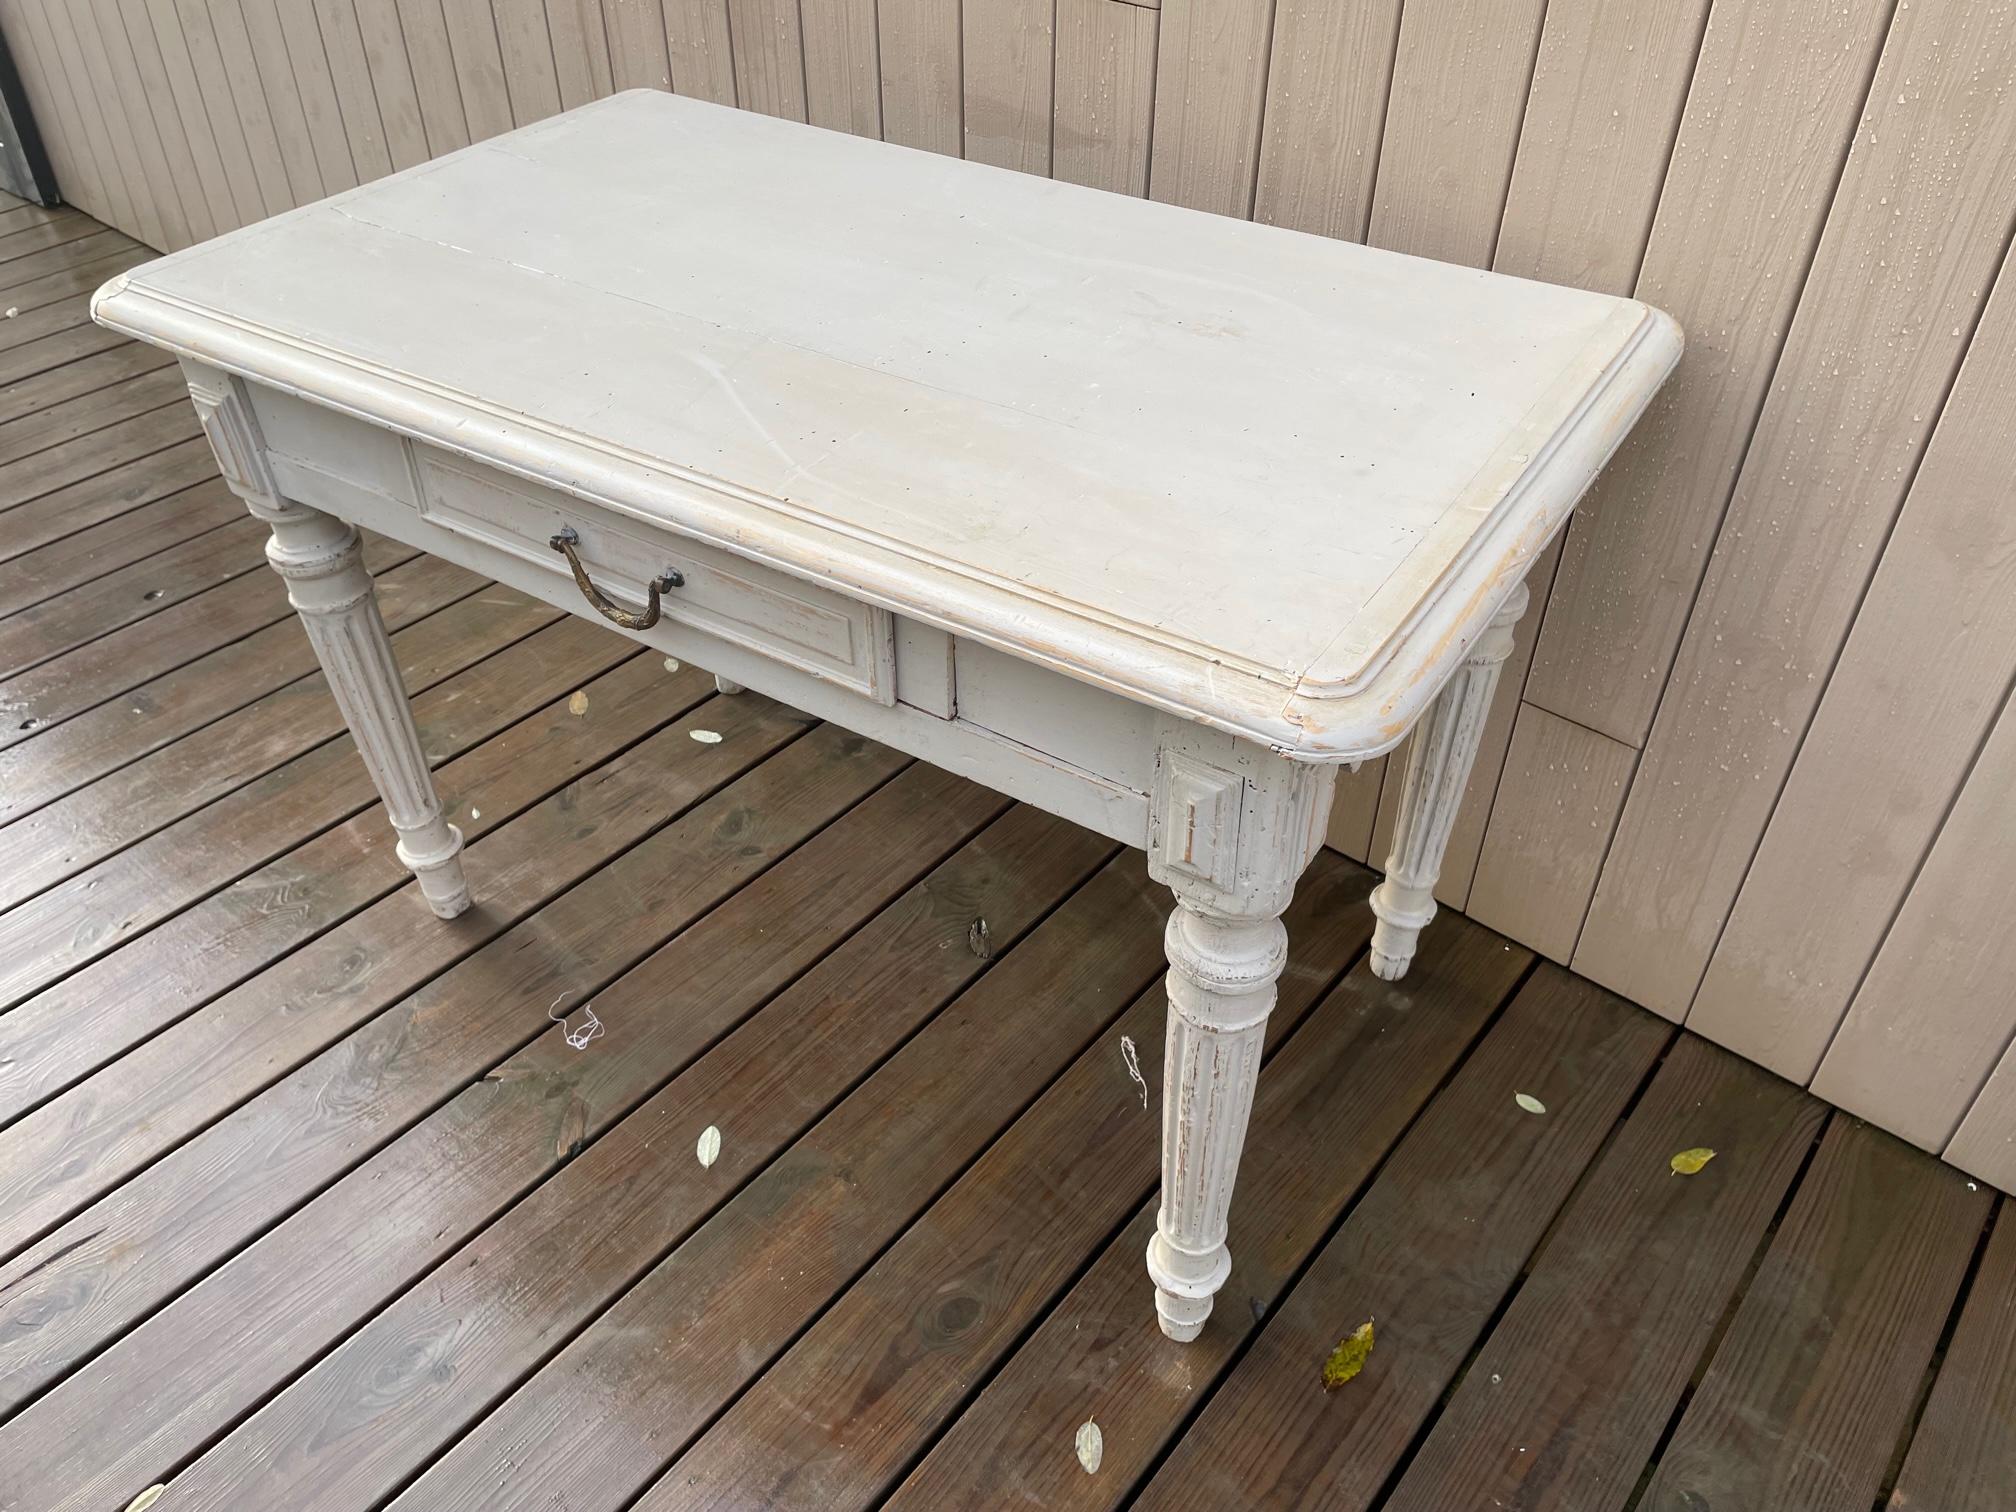 Very nice Late 19th century French butcher table. Used to be a side table in a butcher's shop. Beautiful wood cutting on the sides. 
A drawer in the middle with a brass handle. 
Some worms holes but the table has been treated and has a good